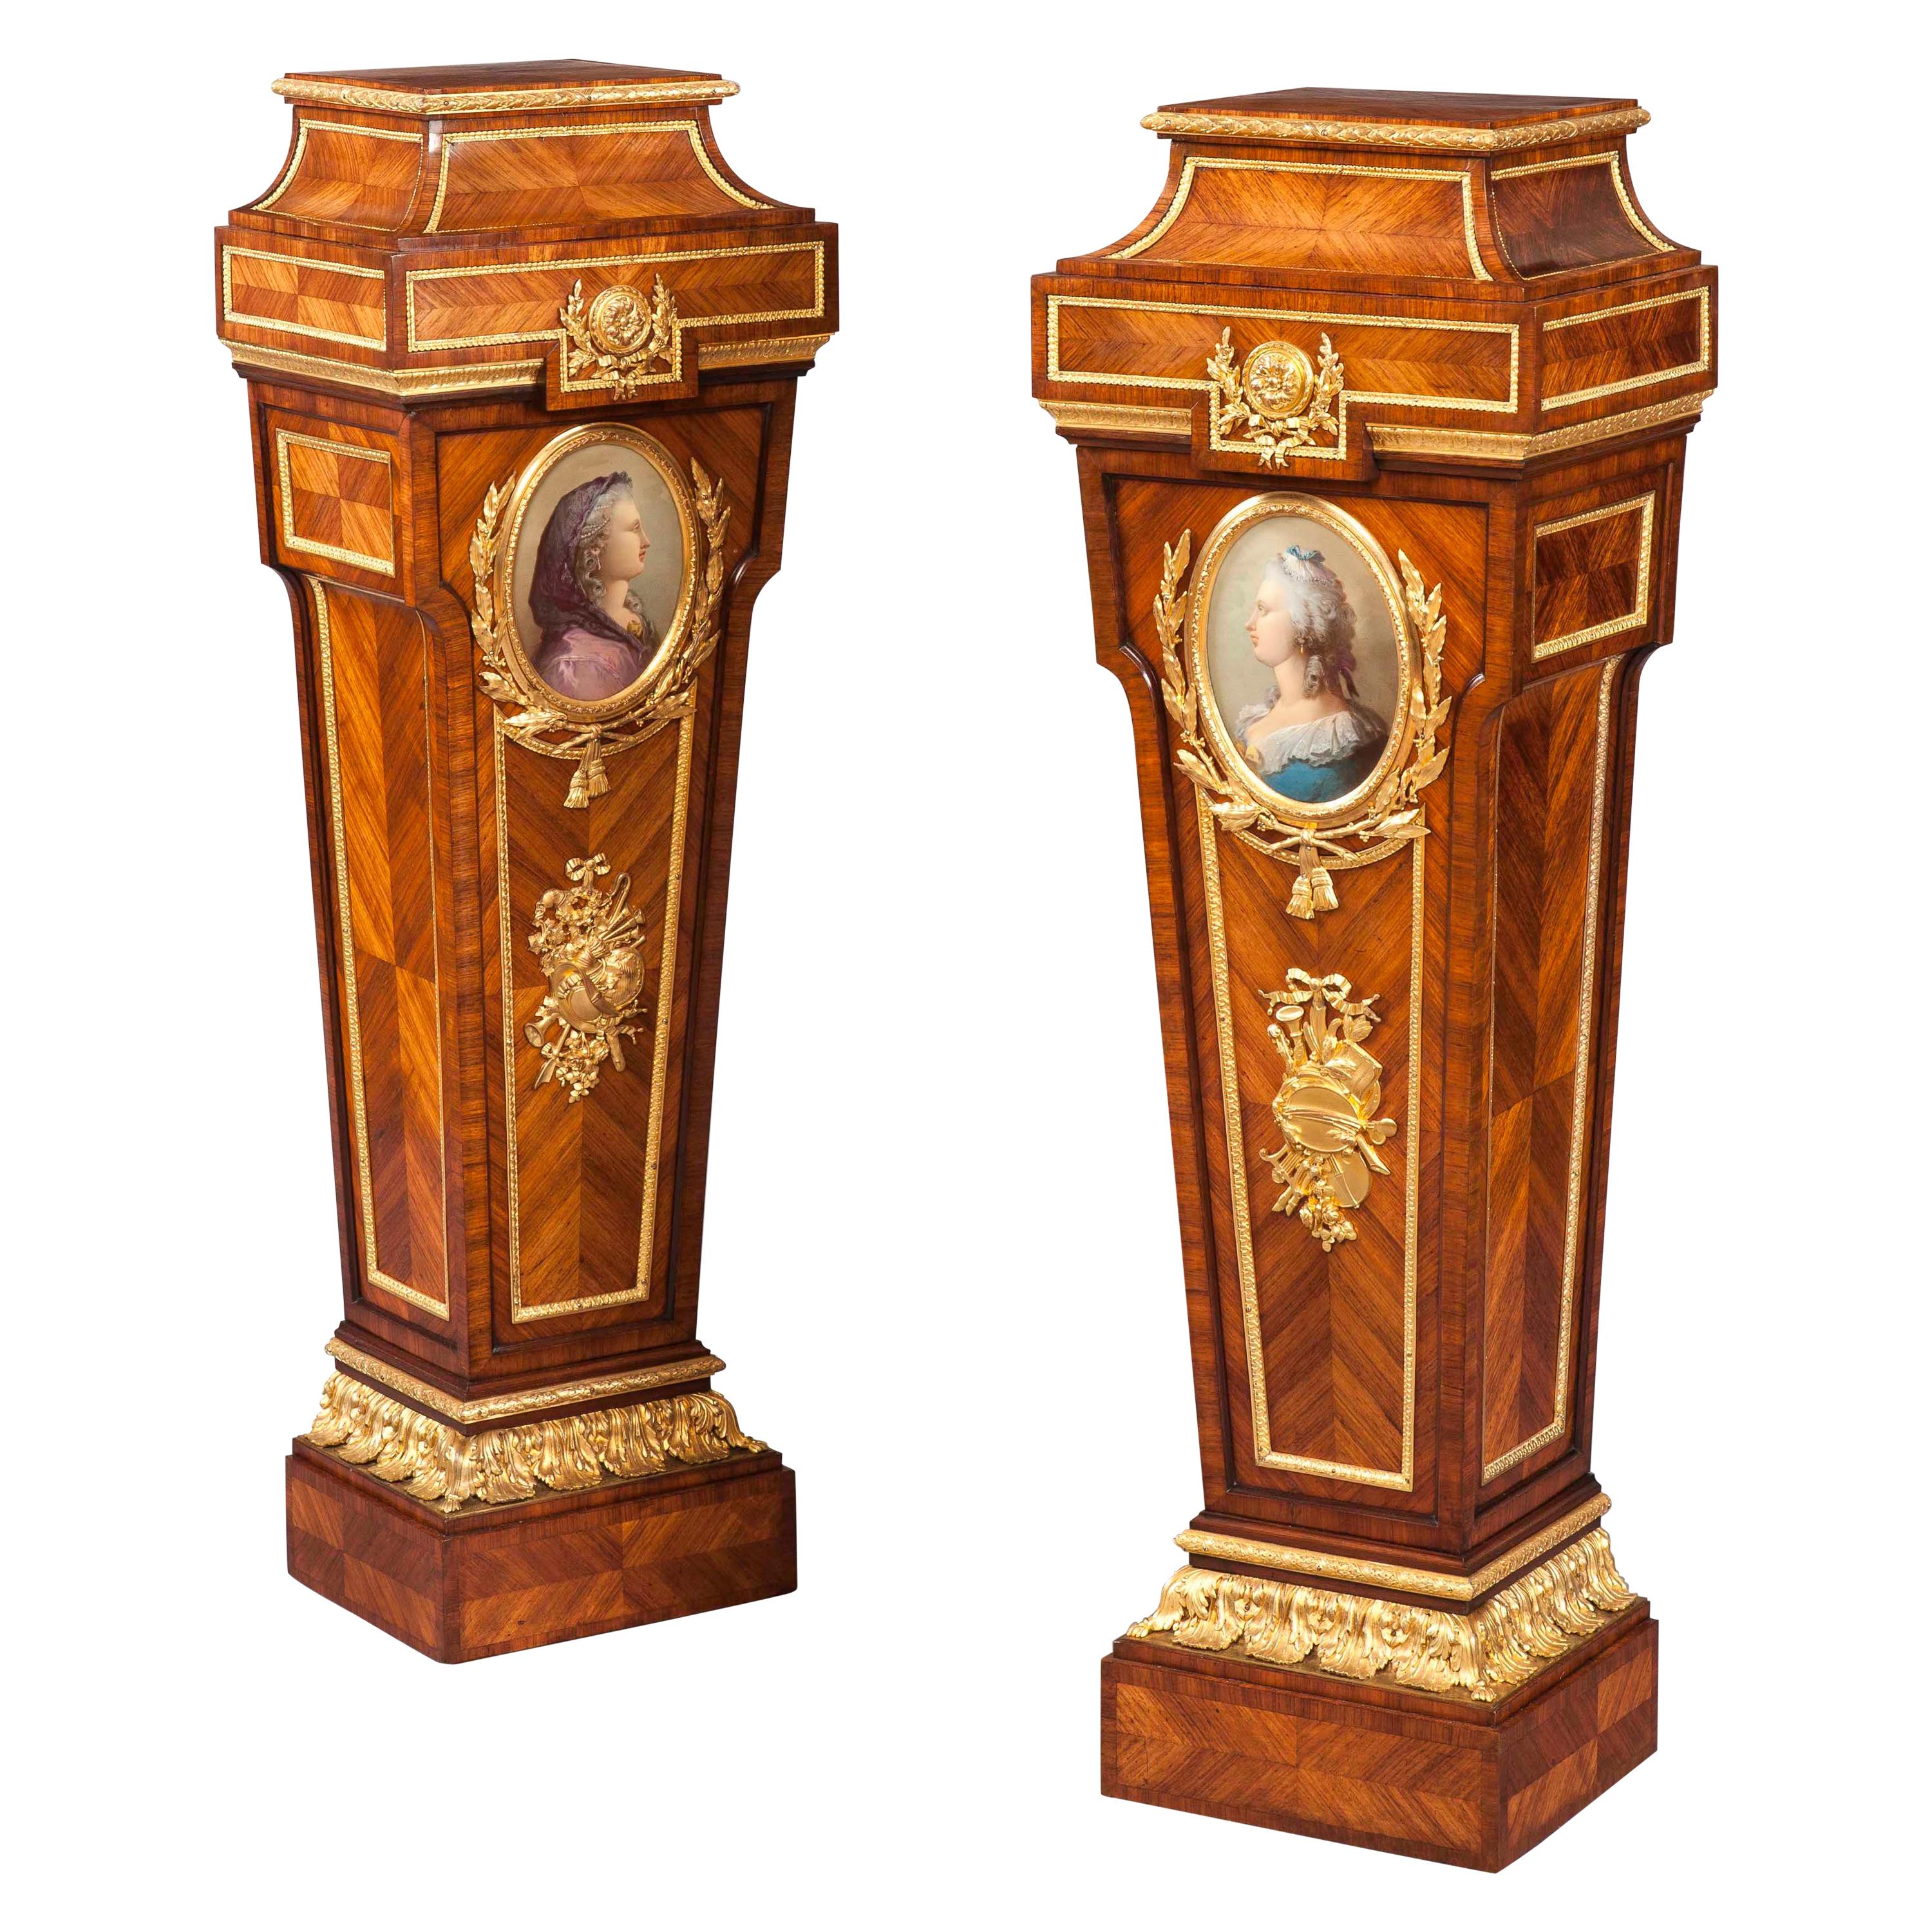 19th Century Pair of Kingwood Porcelain-Mounted Pedestals in the Louis XVI Style